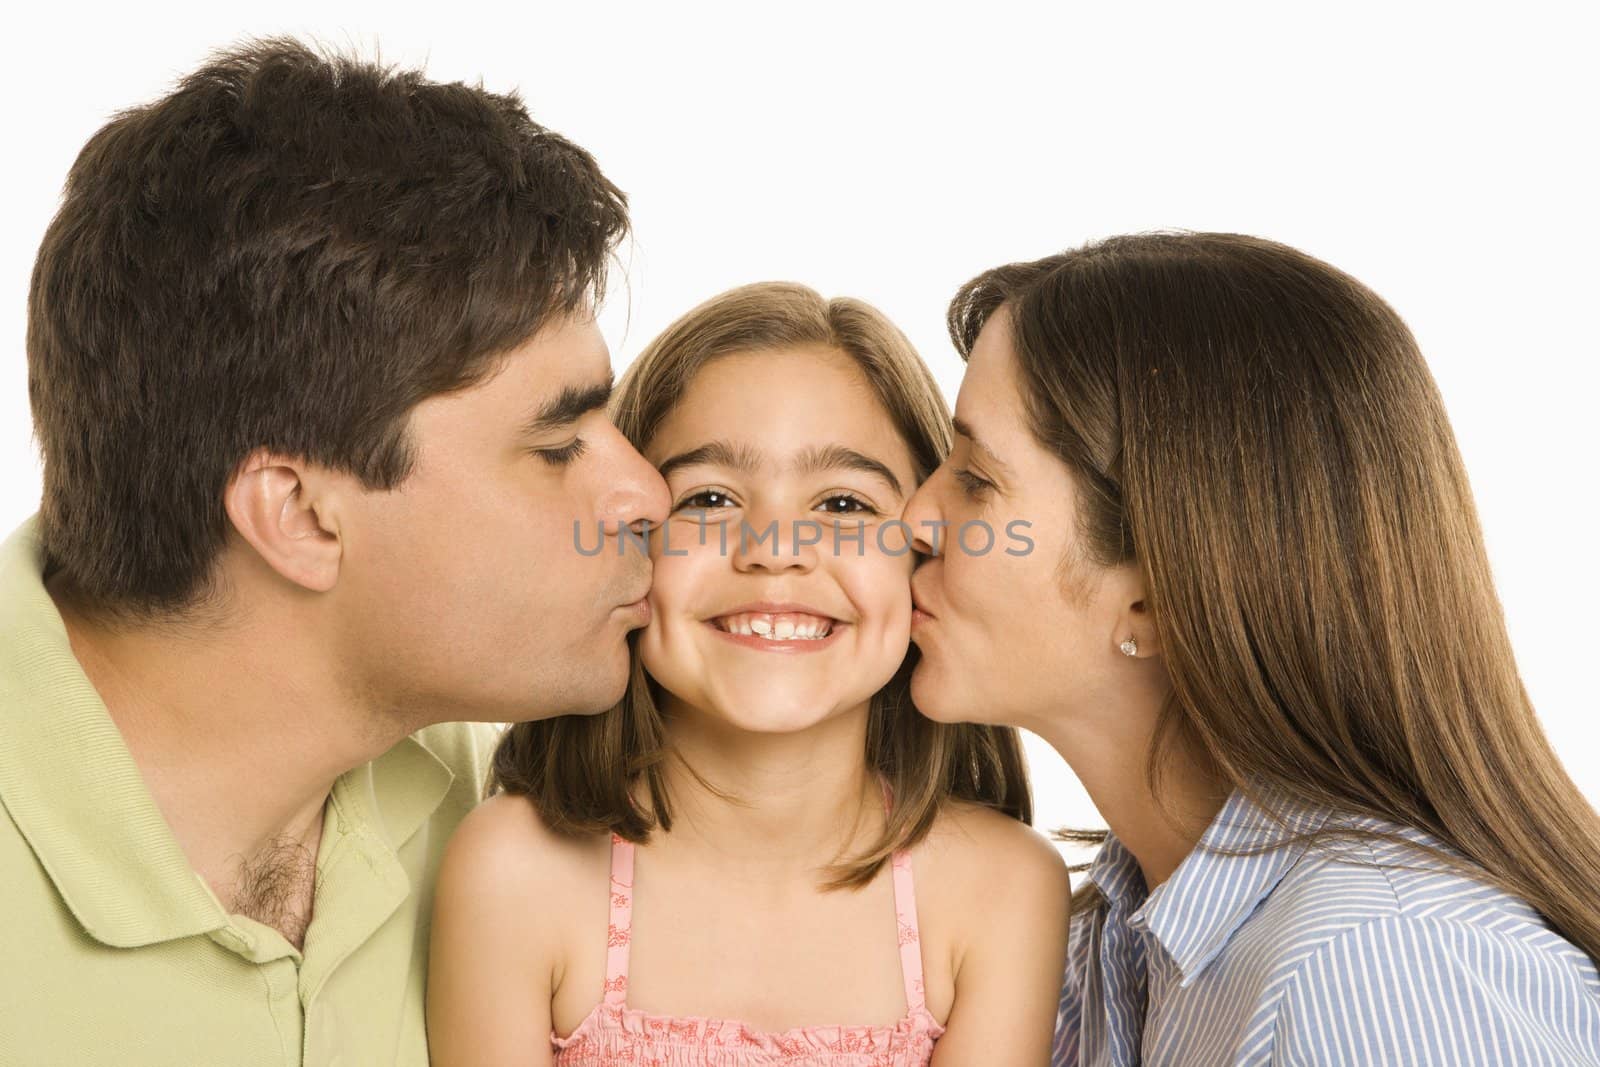 Mother and father kissing smiling daughter on cheek.